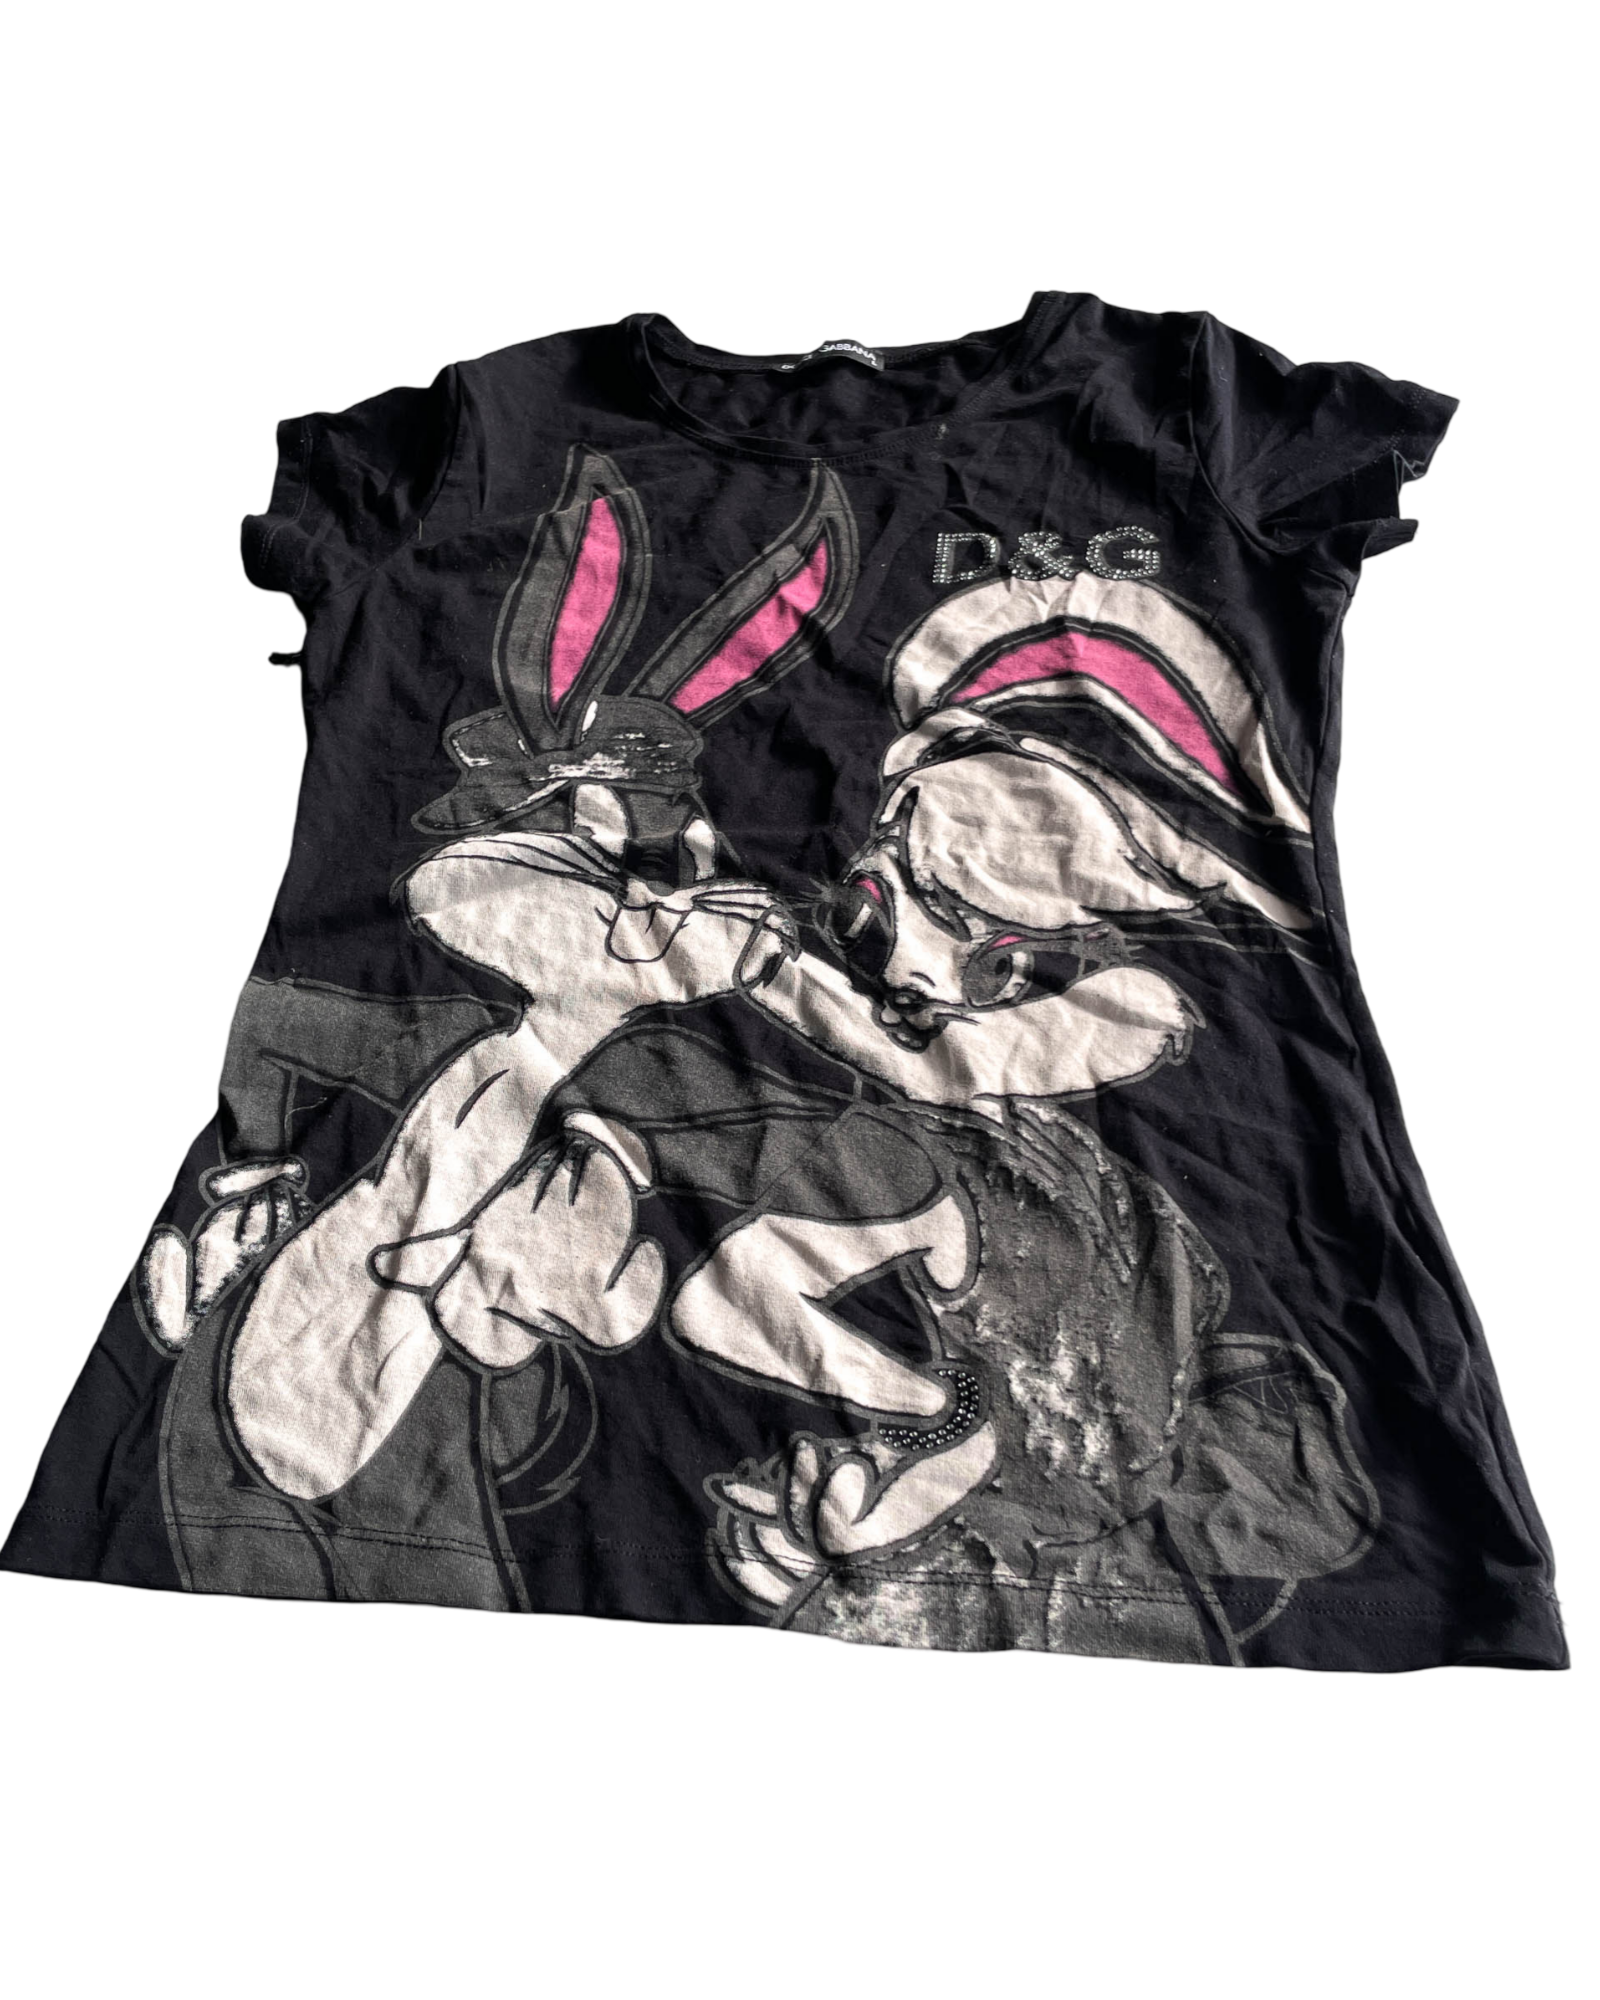 VTG D&amp;G Looney Tunes Women's Bugs Bunny in Love T-Shirt. In size large,